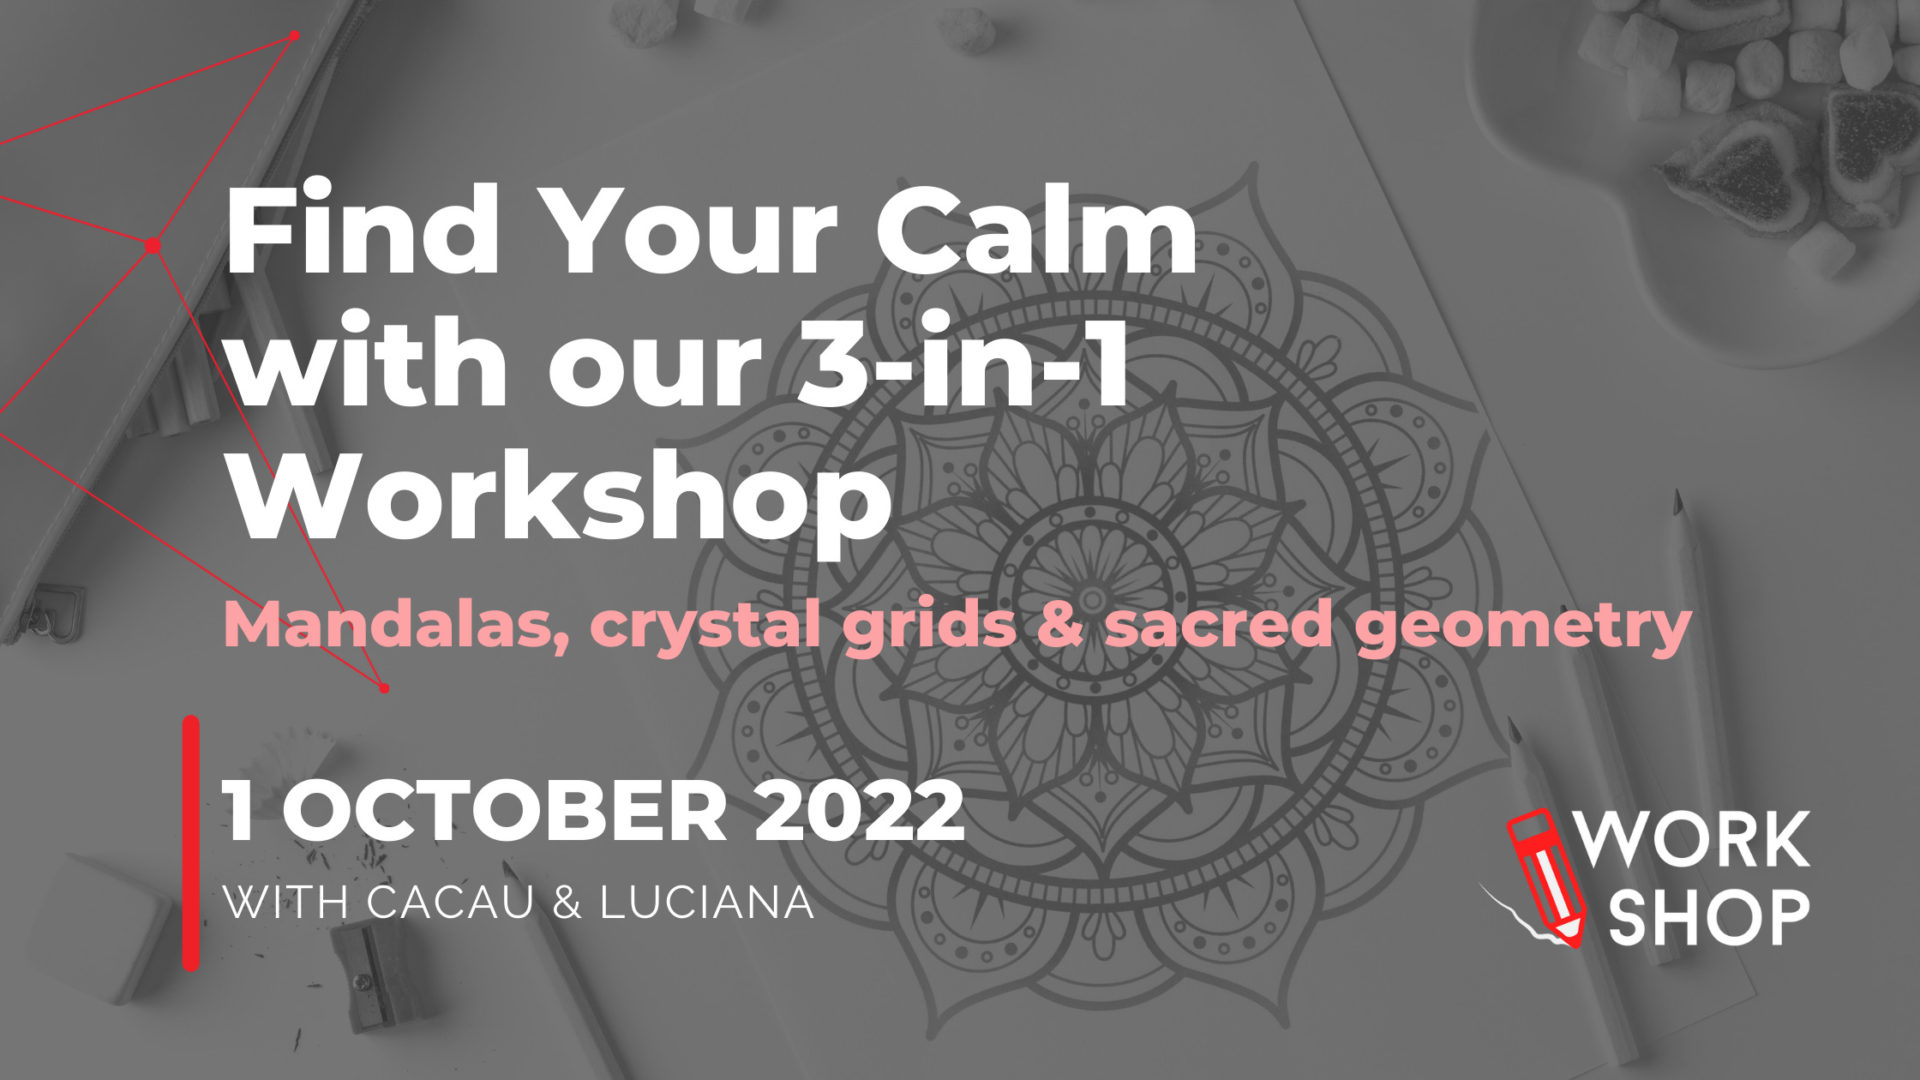 Find Your Inner Calm at Our 3-in-1 Mandala, Crystal Grid & Sacred Geometry Workshop